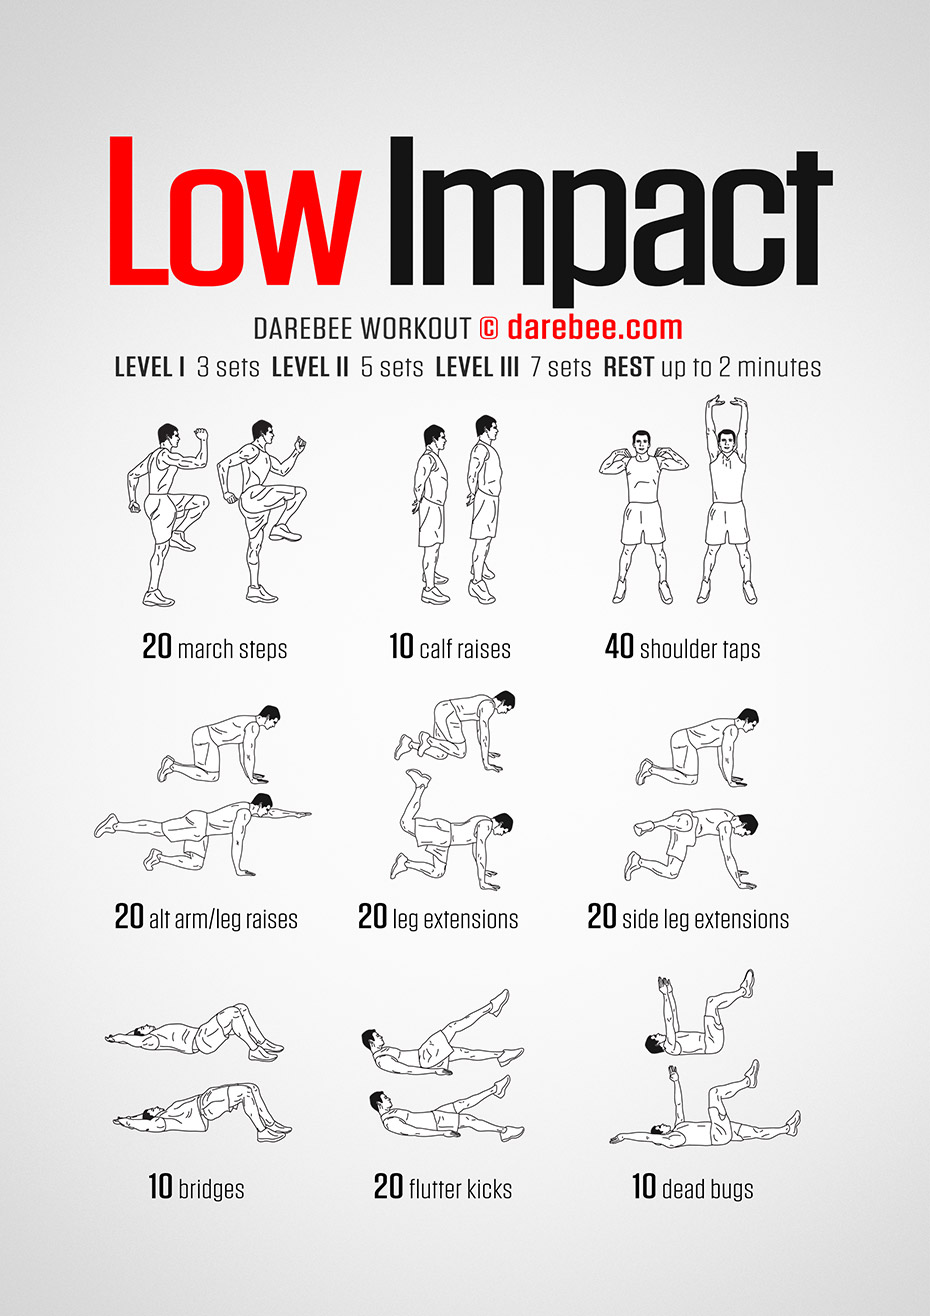 Low impact strength workout for beginners and seniors